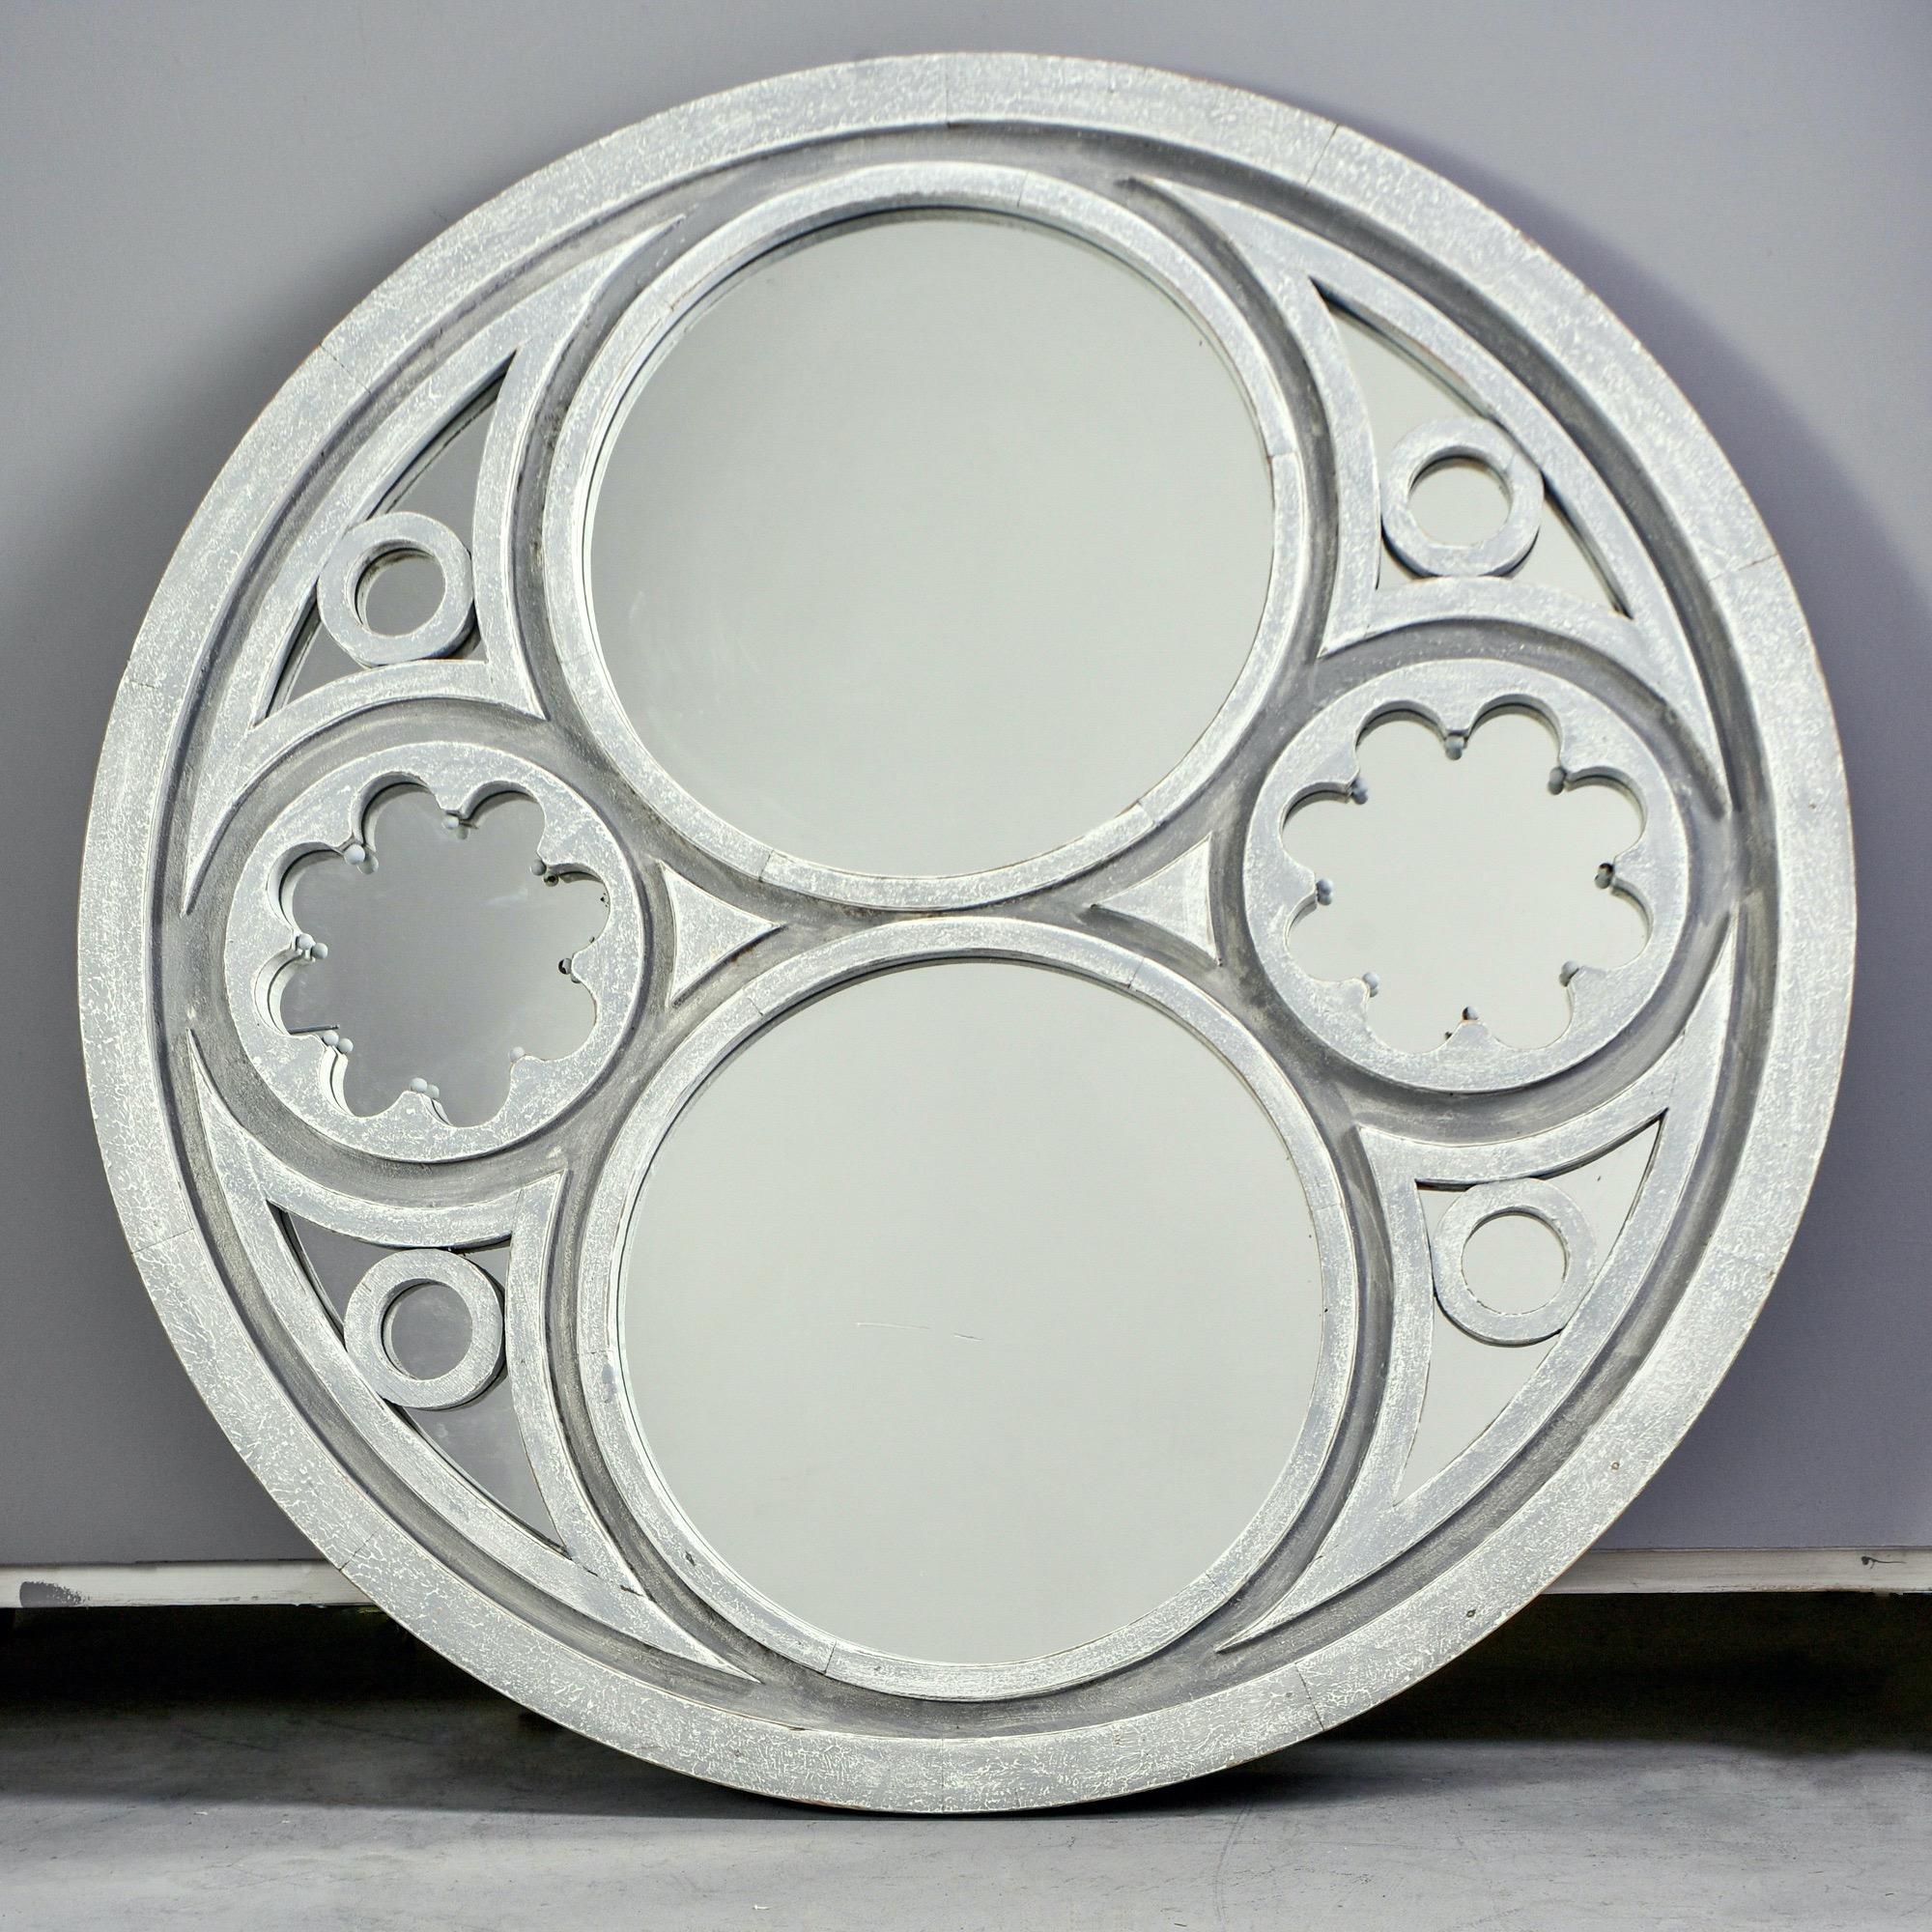 Round framed Swedish style mirror is 52” in diameter, circa 2010. Decorative cutout in frame and gray blue painted finish. Unknown maker.